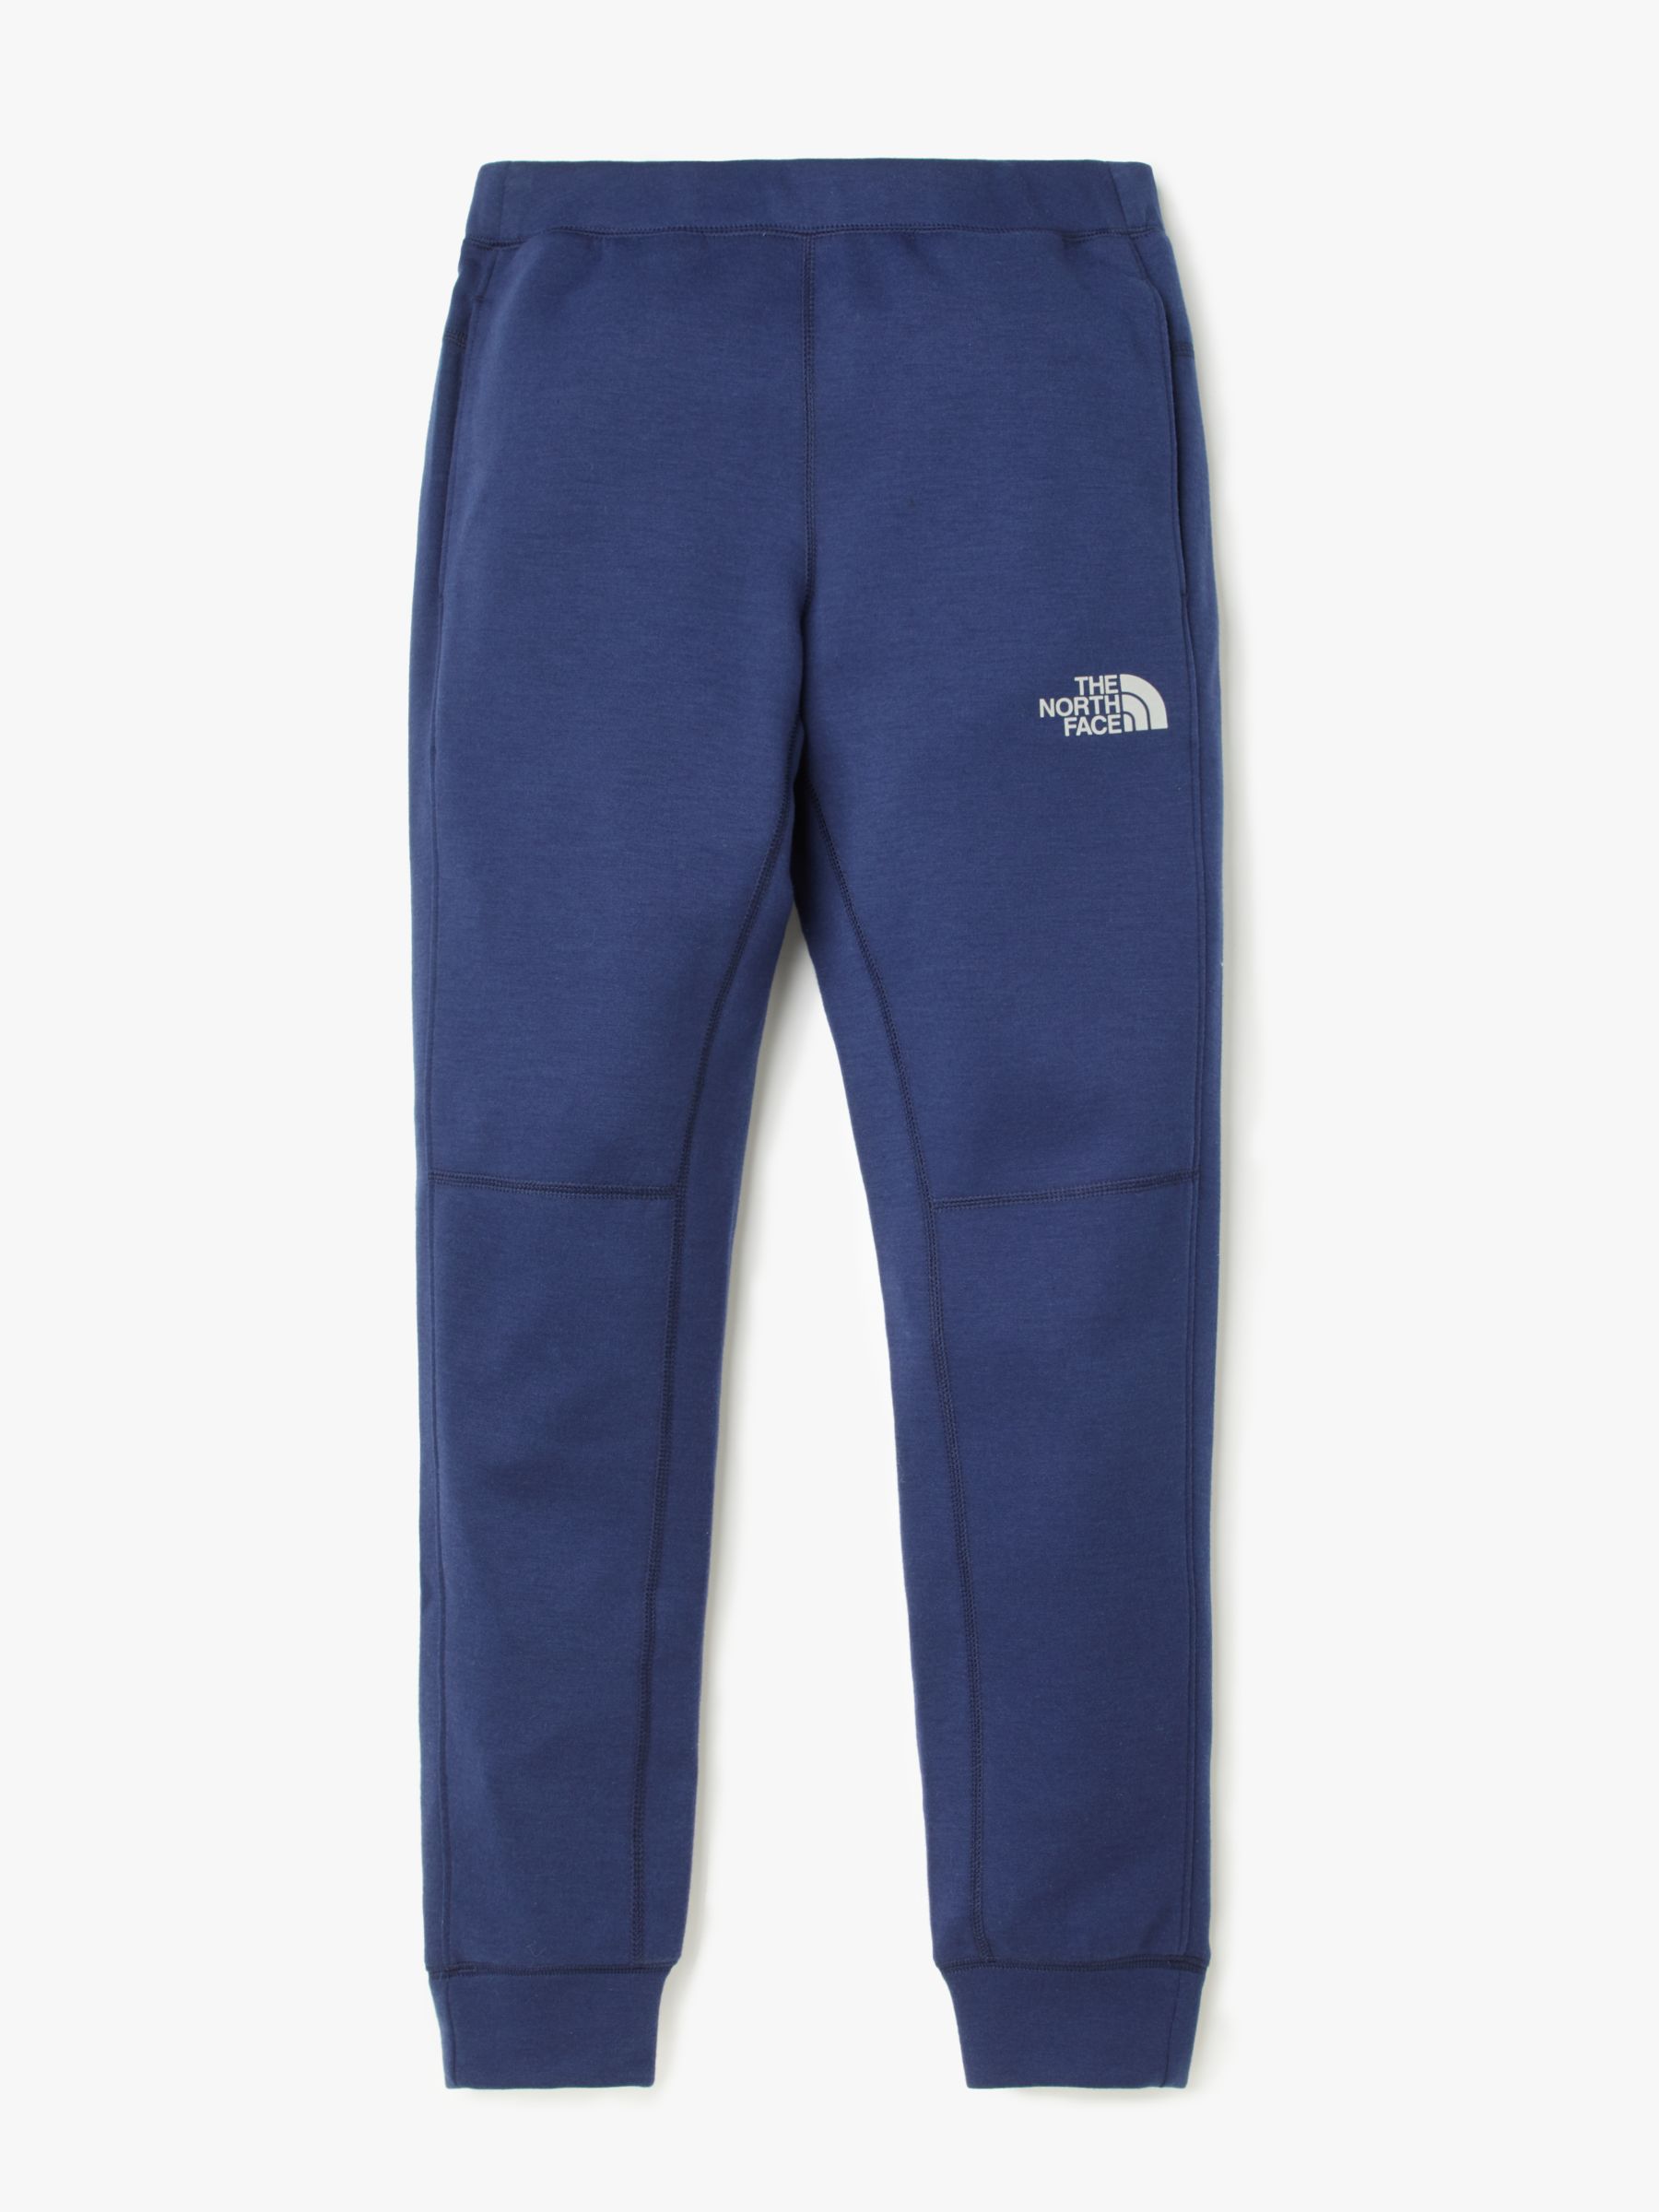 North Face Boys' Cuffed Joggers, Navy 